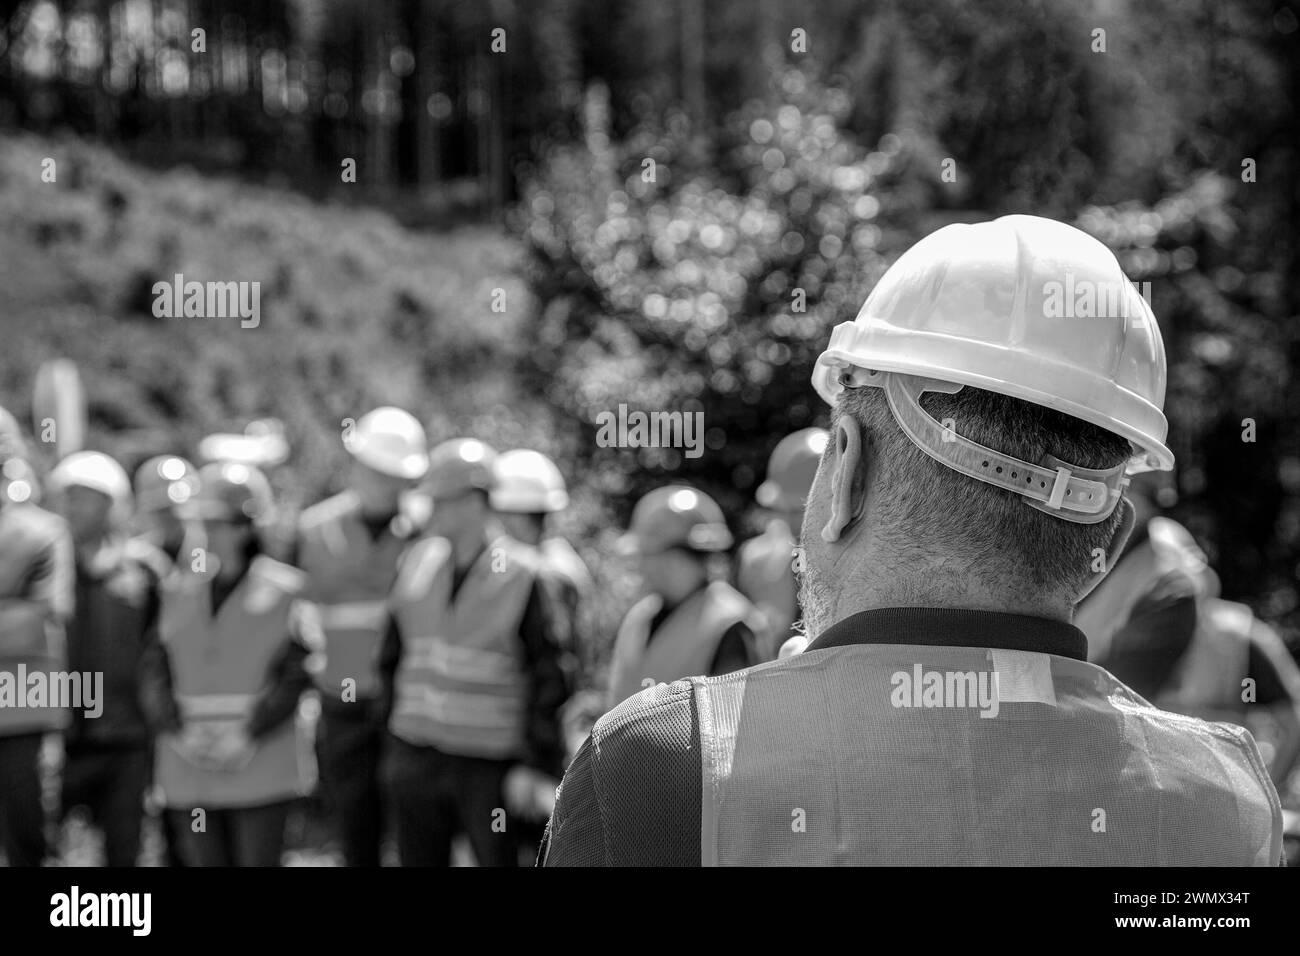 Skillful worker stand together showing teamwork. Industrial people and manufacturing labor concept. Worker group wearing vest, safety. Architector Stock Photo